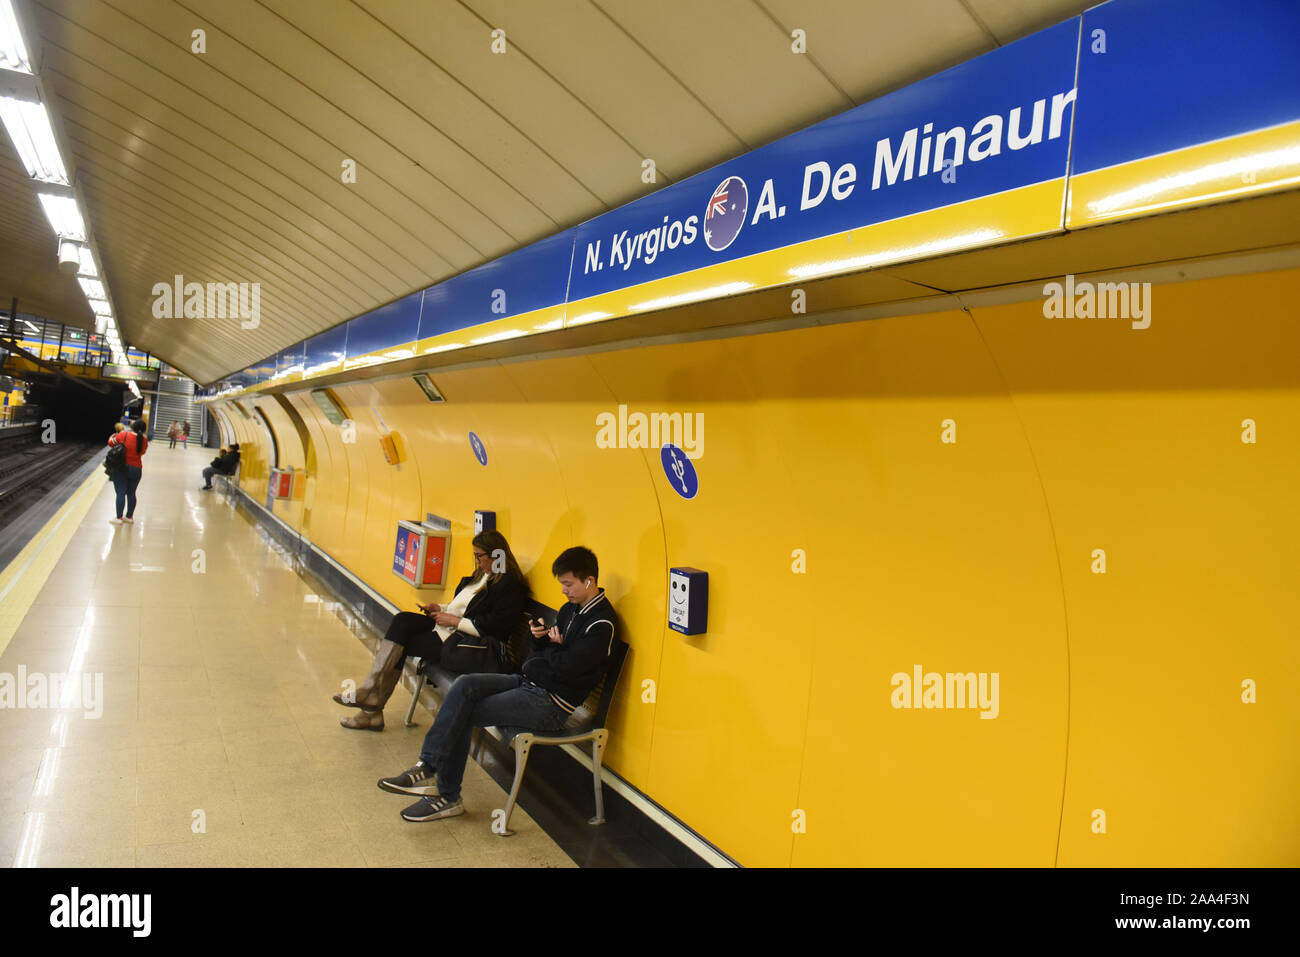 Delicias Metro station in Madrid seen with the names of the Australian national team tennis player Nick Kyrgios.Line 3 Metro Madrid stations have the names of the tennis players and the teams that will compete in the new Davis cup tennis tournament being held in Madrid for the first time.  It will start tomorrow Tuesday 19, Nov 2019. Stock Photo